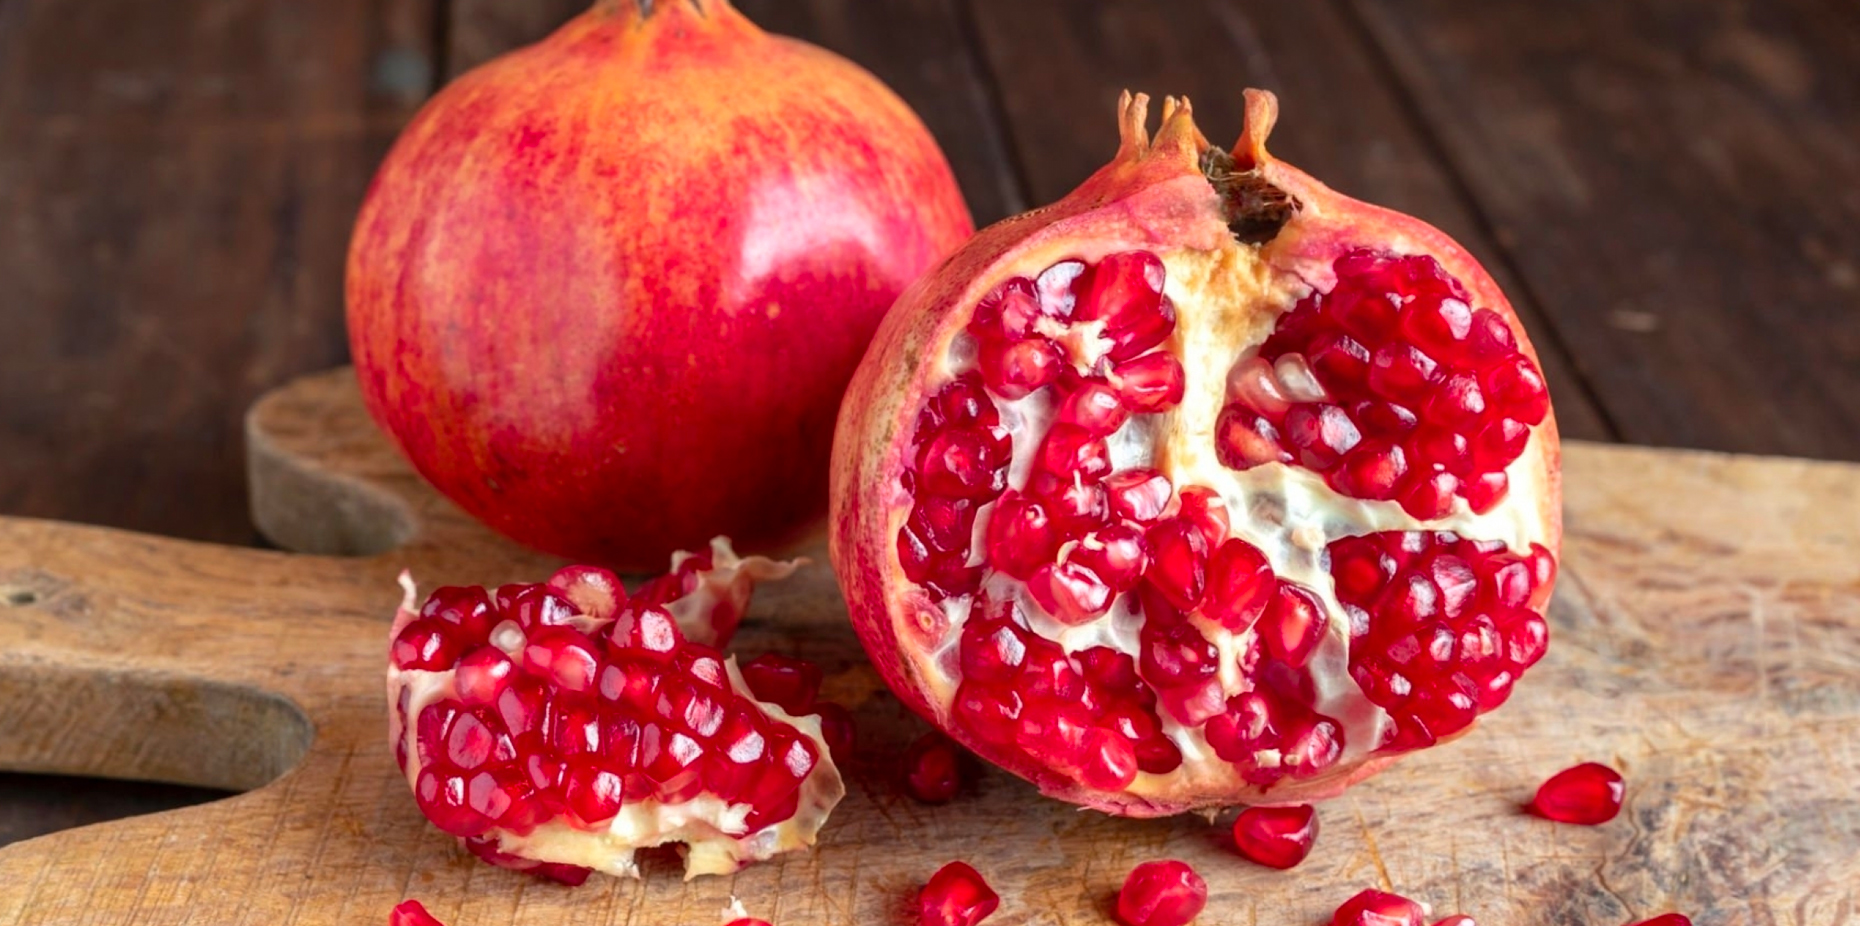 Pomegranate: Facts, Nutrition, Benefits & More